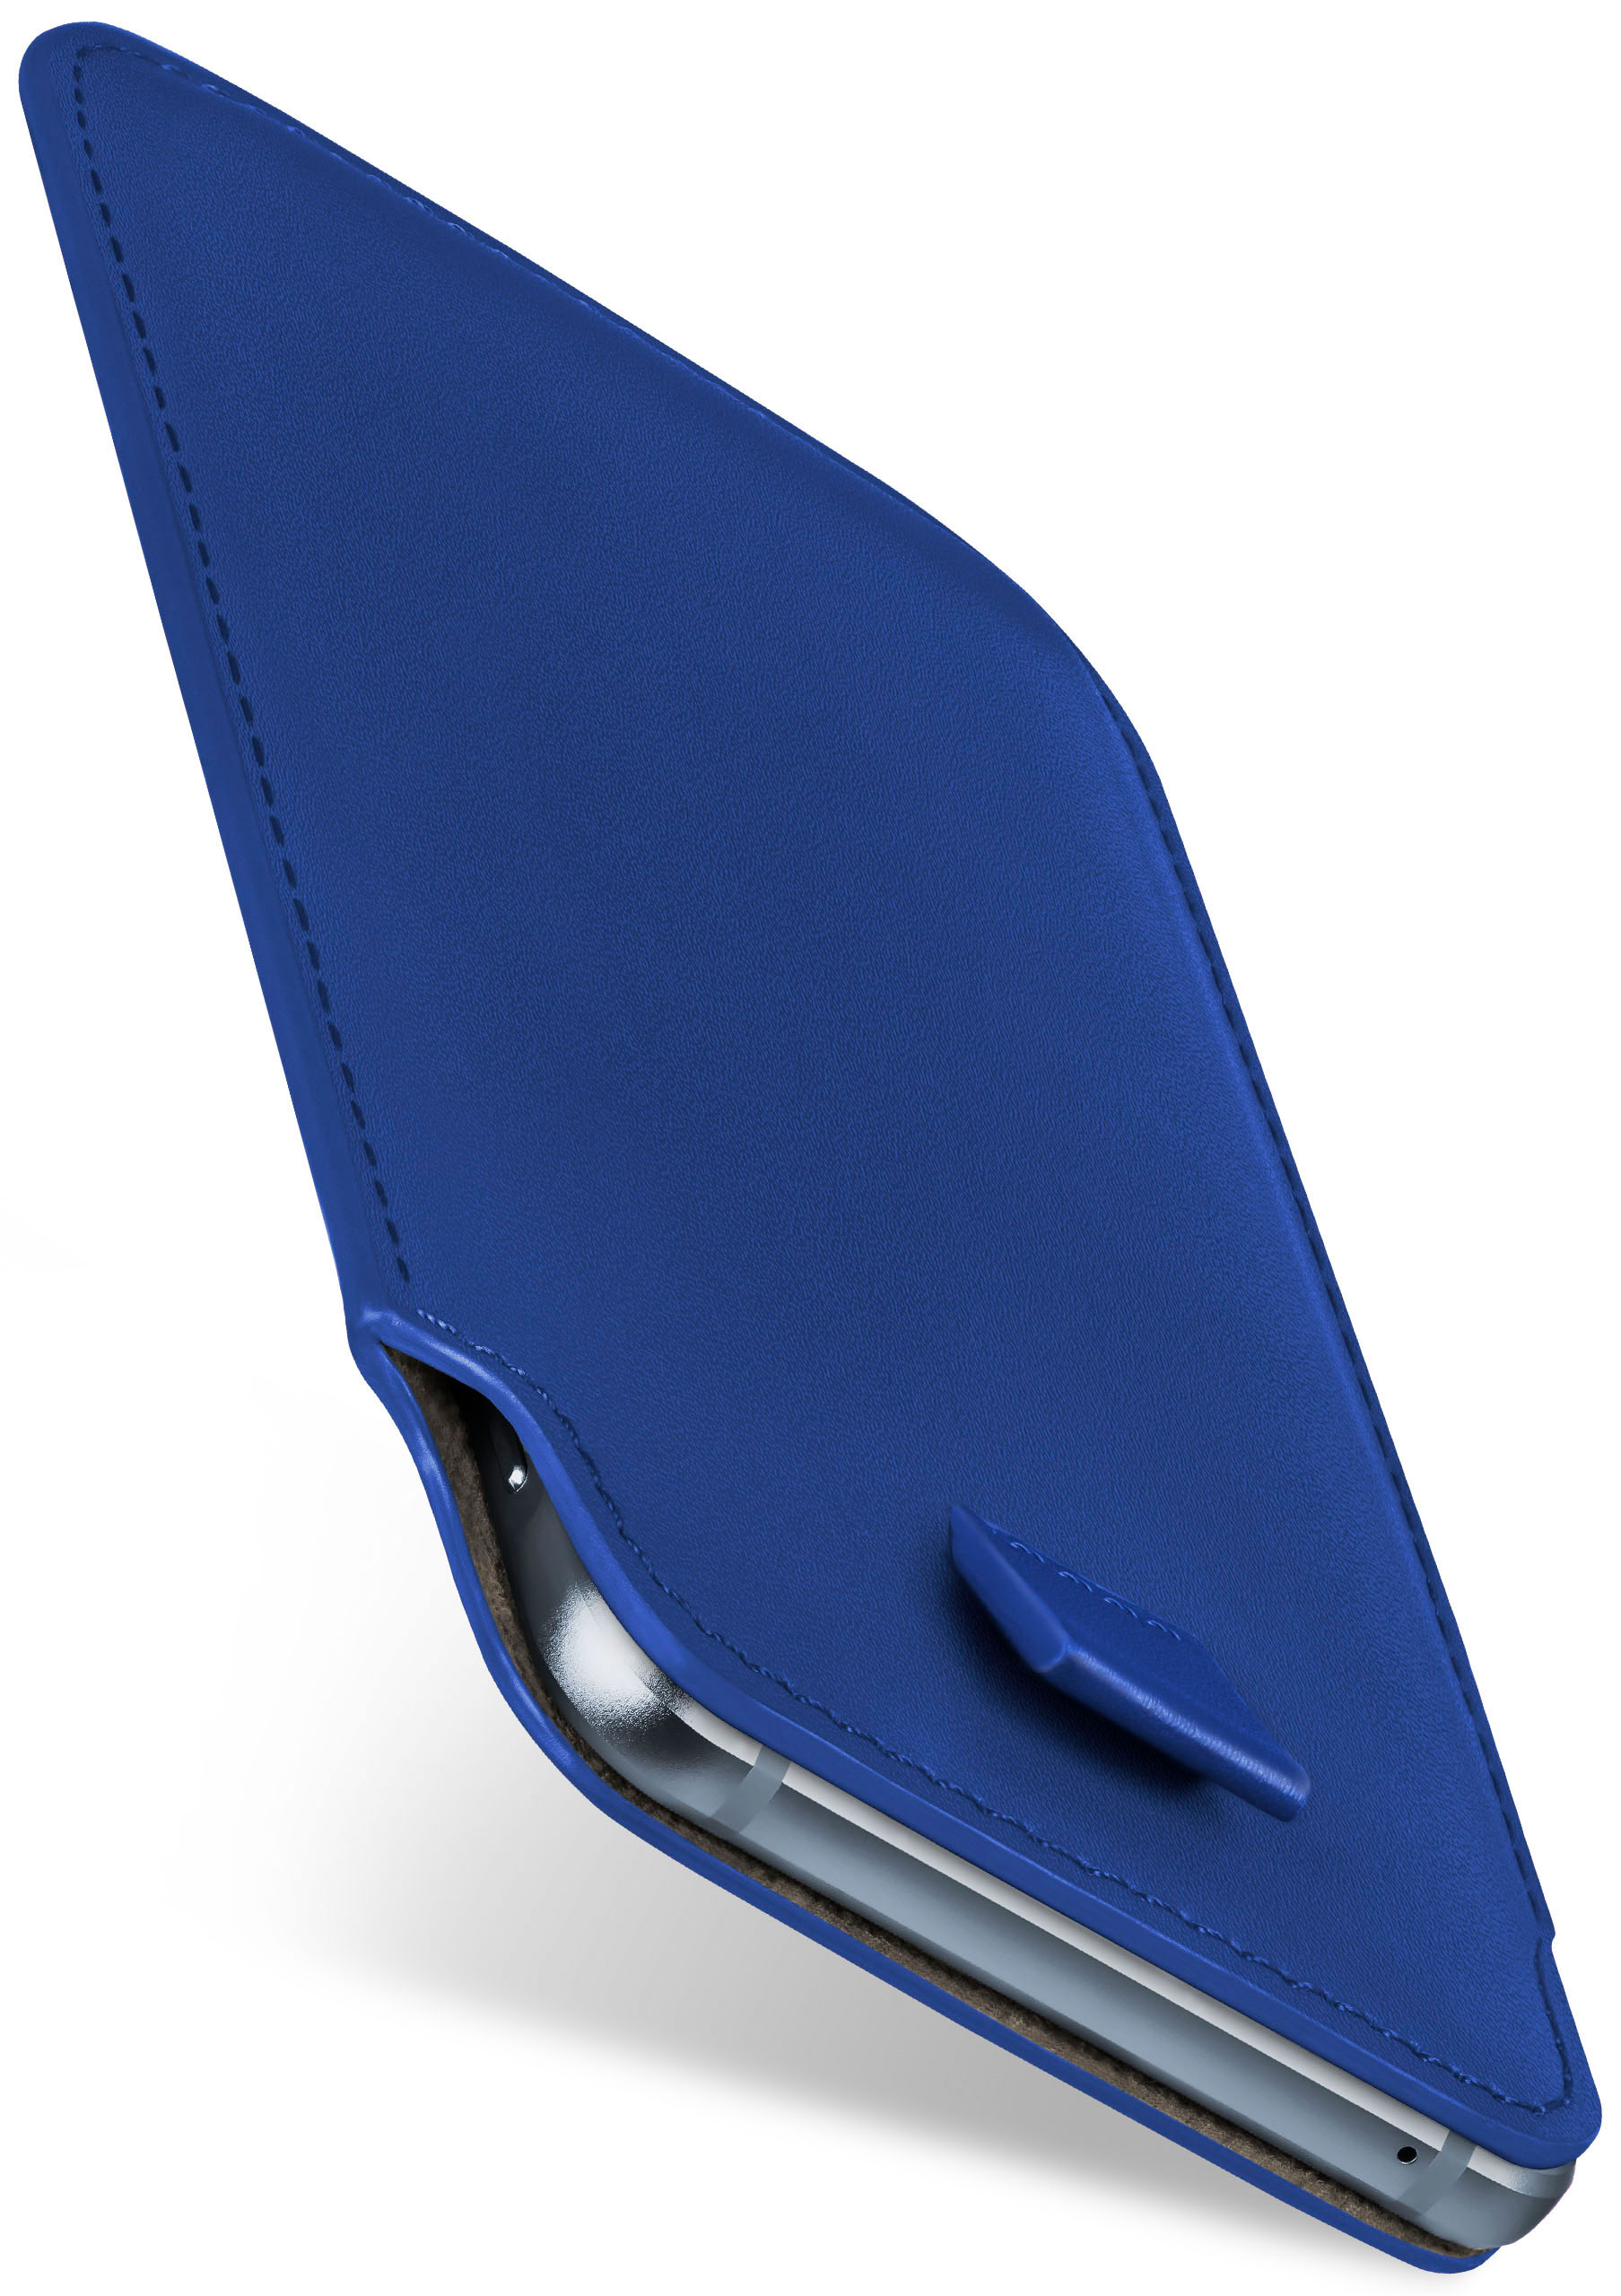 MOEX Slide Case, Full Pro, Royal-Blue Cover, View2 Wiko